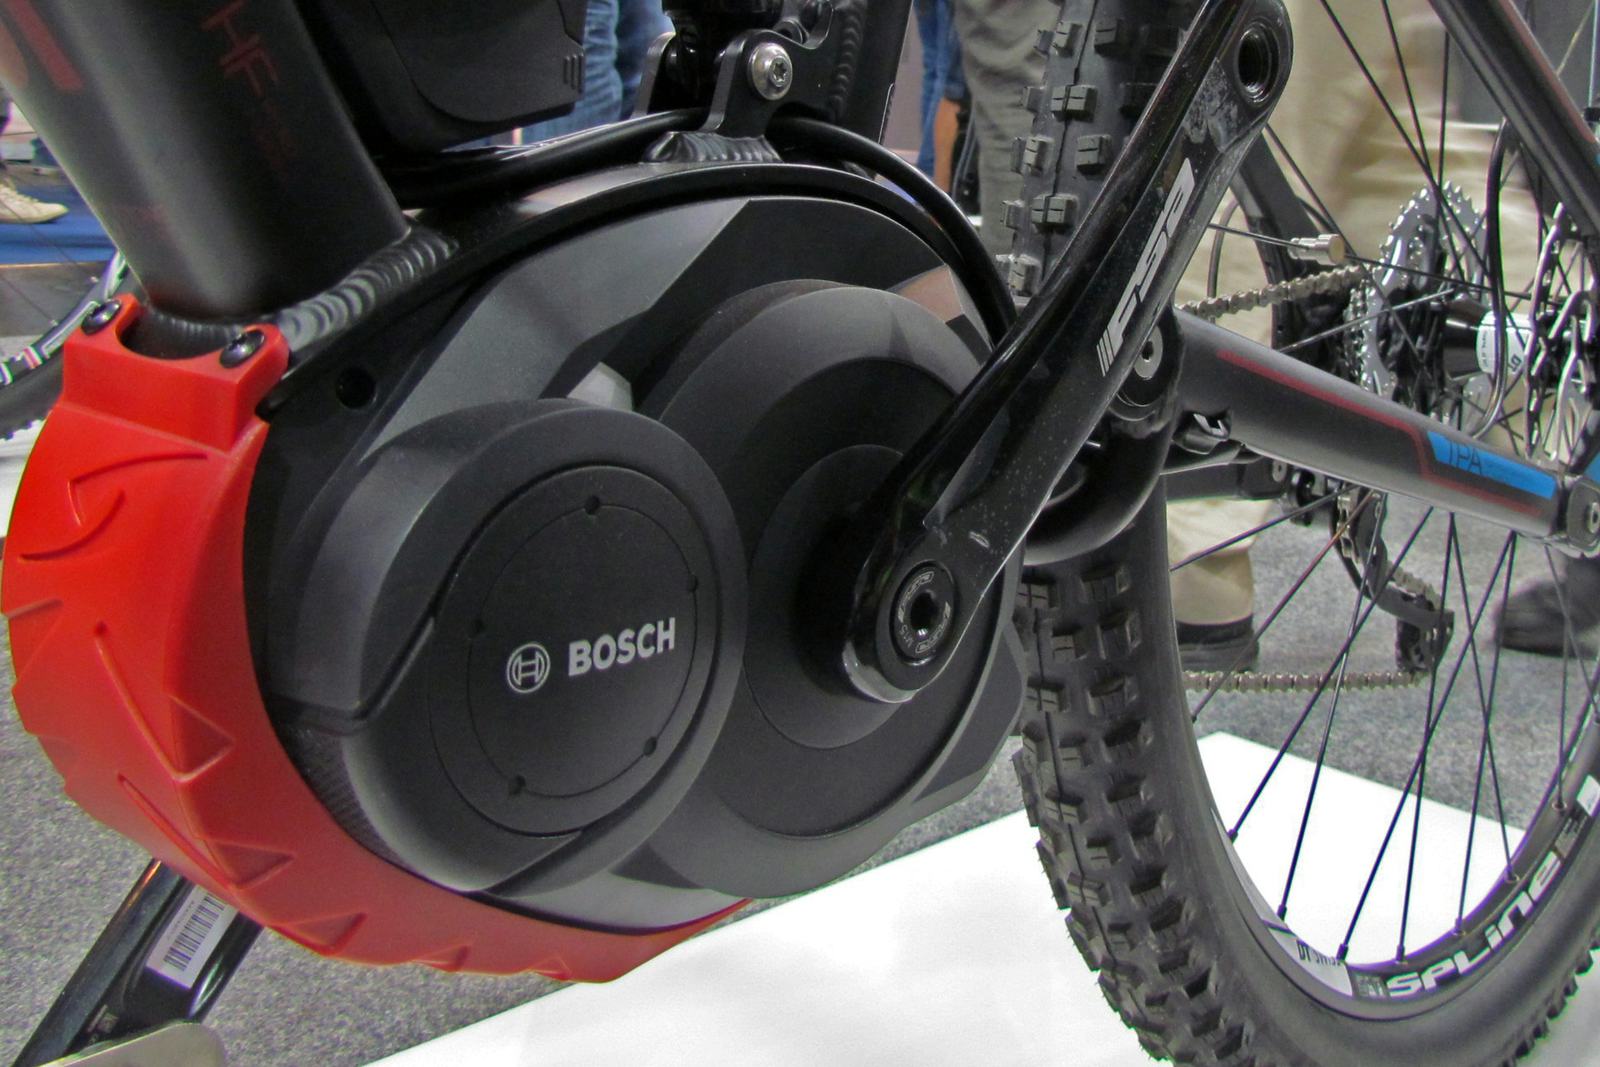 Numerous webshops are offering e-bike tuning kits. The one for Bosch systems looks the same at all webshops with similar photos used online. – Photo Bike Europe
